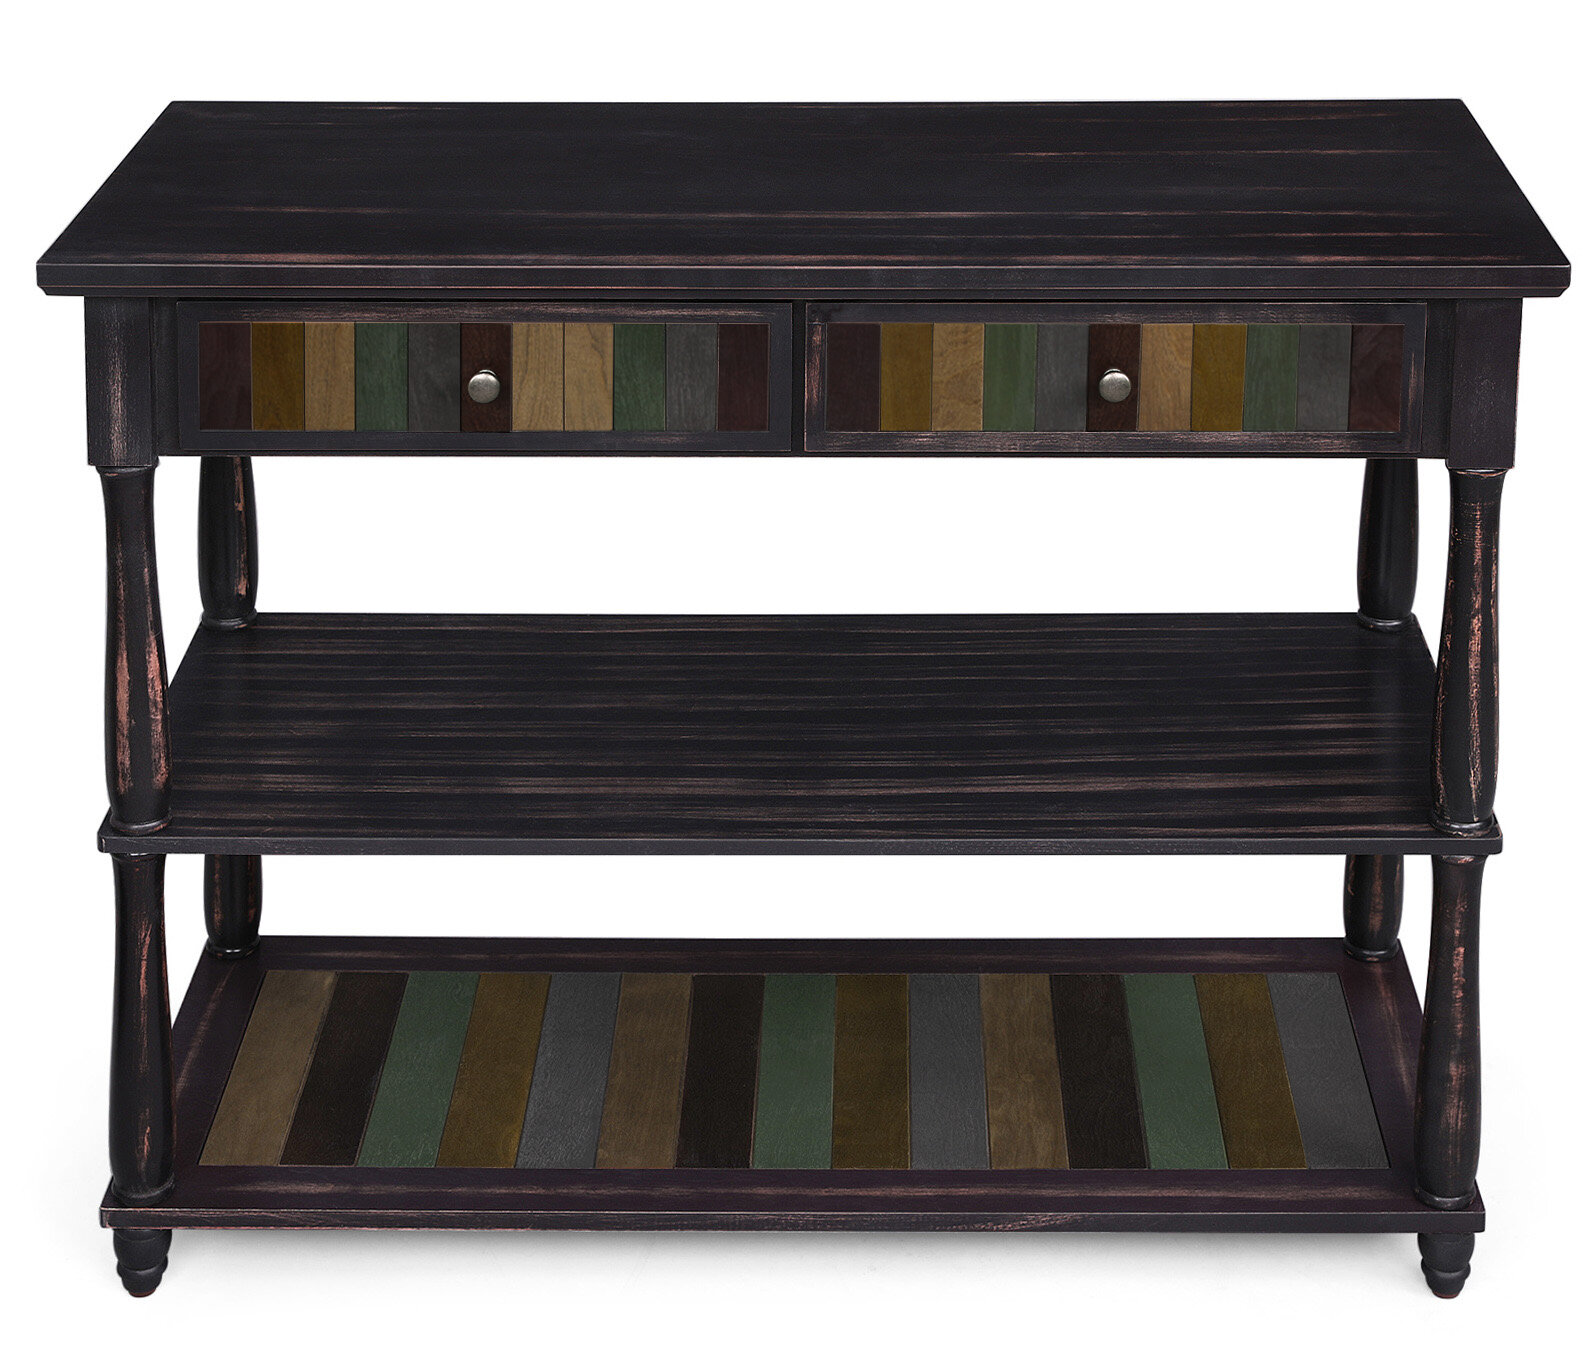 World Menagerie Console Table With Colourful Drawers 3 Tier